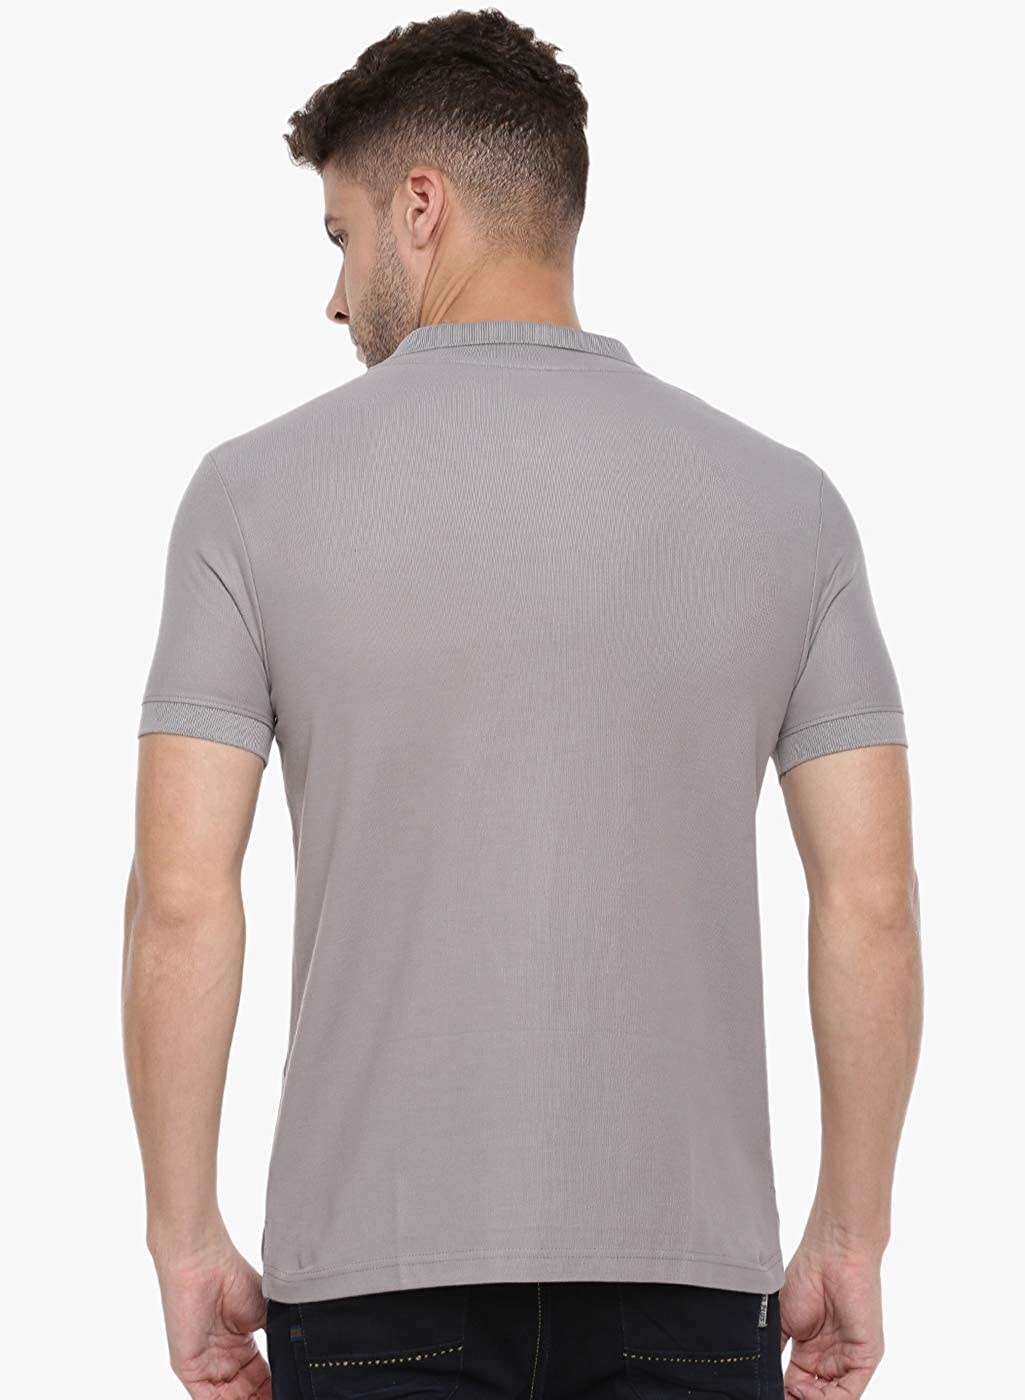 Grey Slim Fit Polo Neck T-Shirt with collar for Men - Stilento